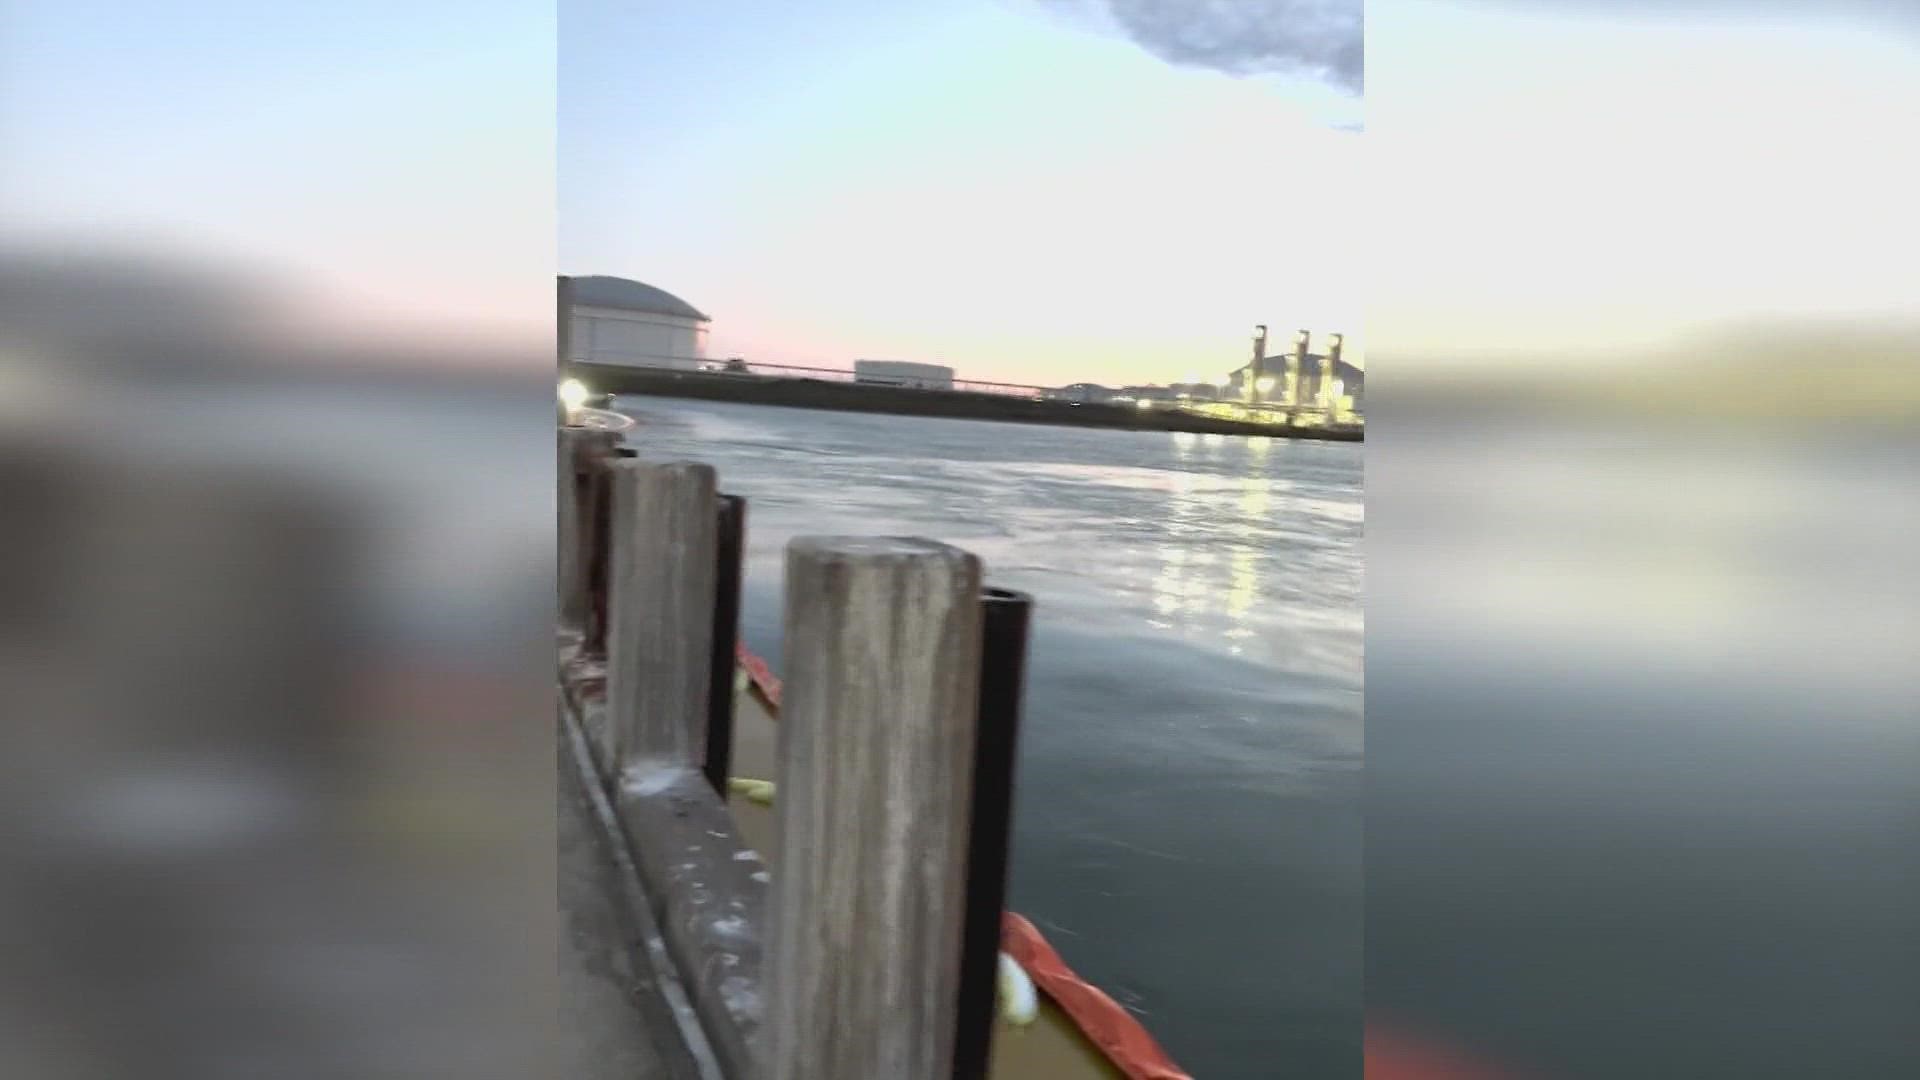 The Coast Guard is working to clean up the oil spill.